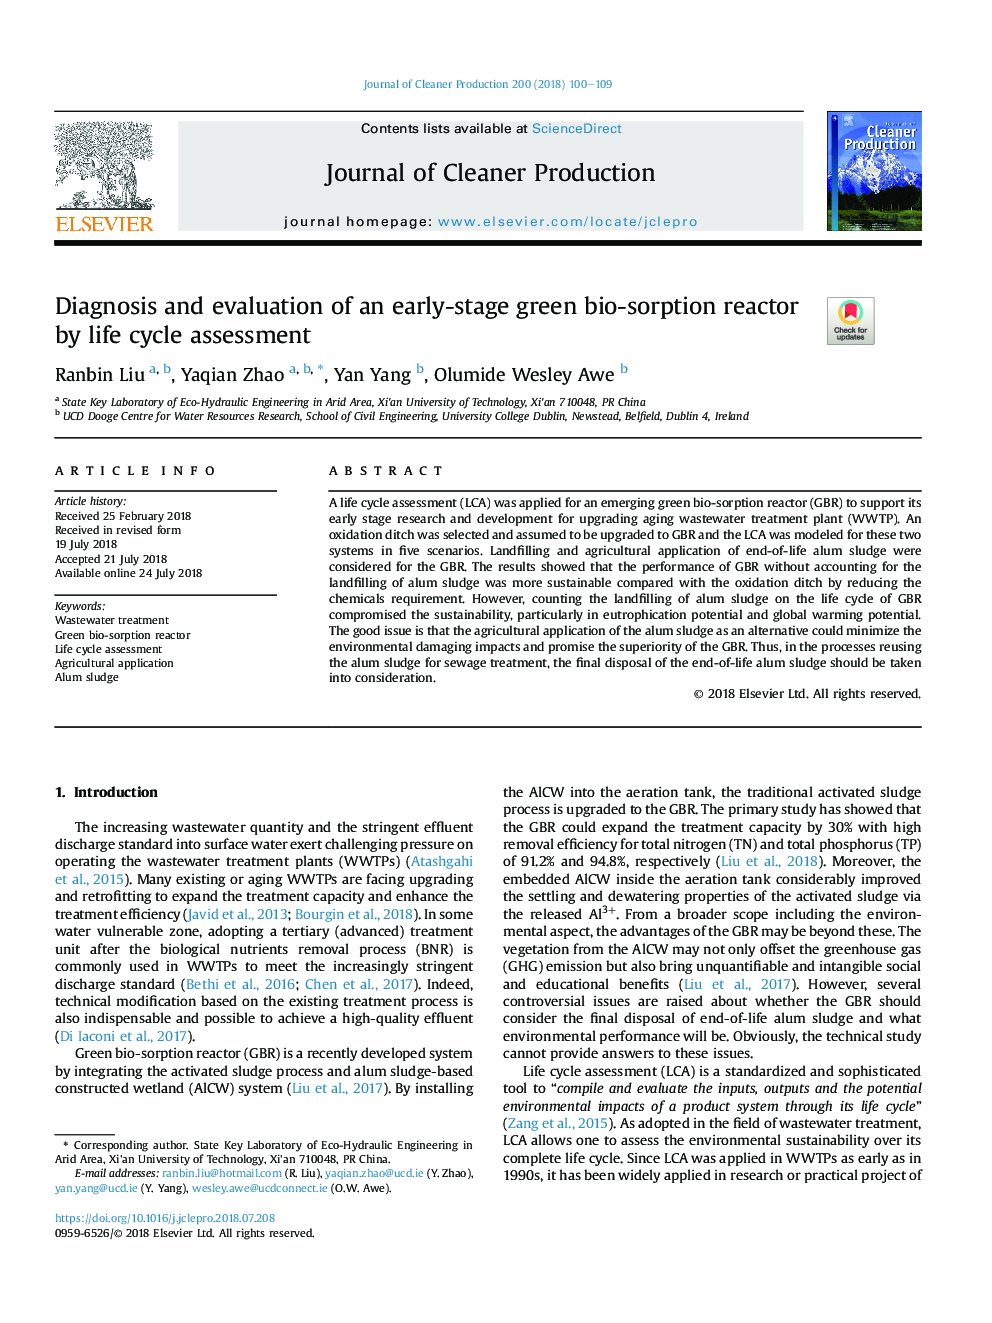 Diagnosis and evaluation of an early-stage green bio-sorption reactor by life cycle assessment